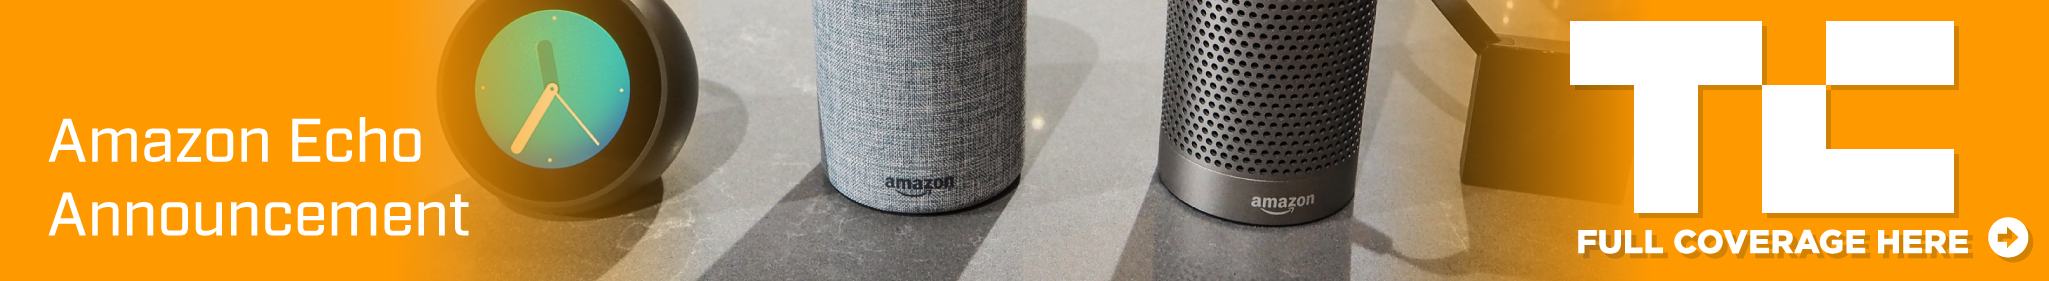 Amazon announces a high-end $99 Echo to compete with Apple’s HomePod